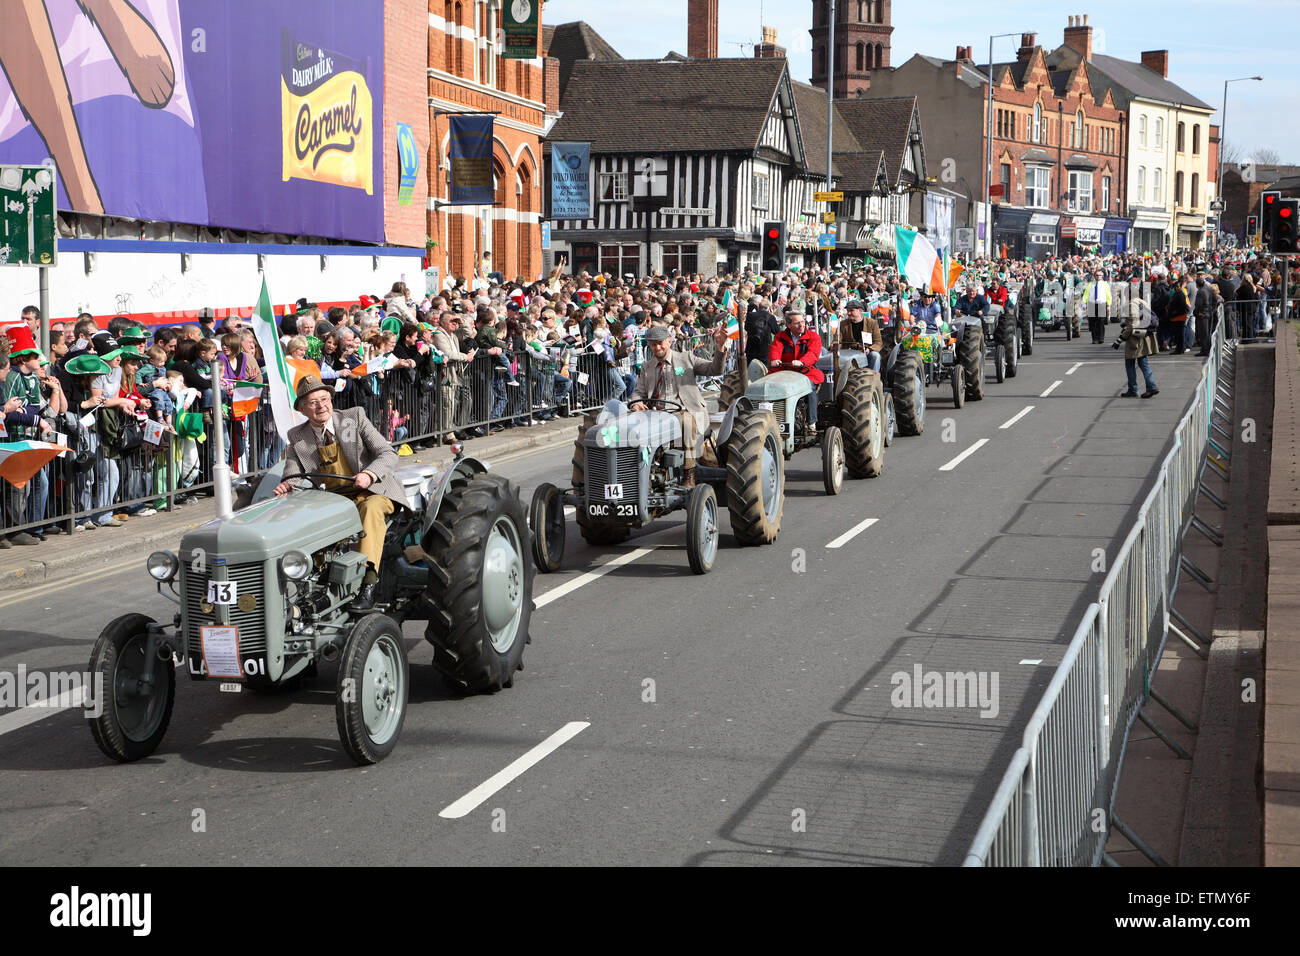 A parade of vintage tractors at Birmingham's St Patrick's Day celebrations Stock Photo